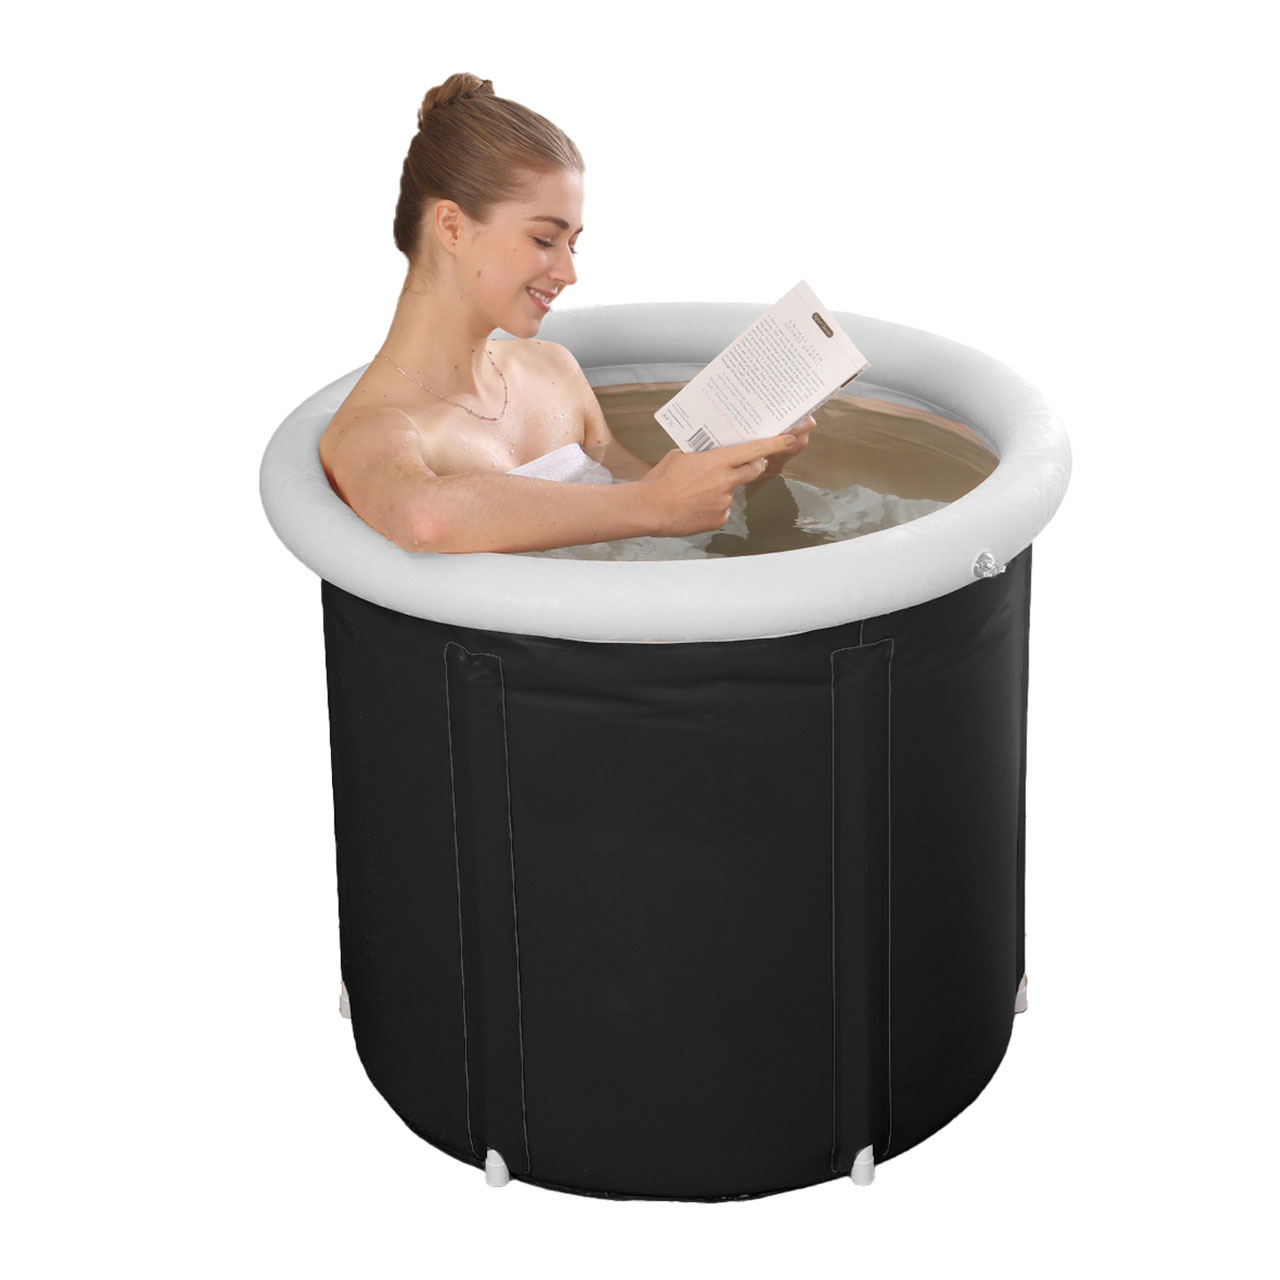 My Experience with Ice Baths for Post-Exercise Recovery